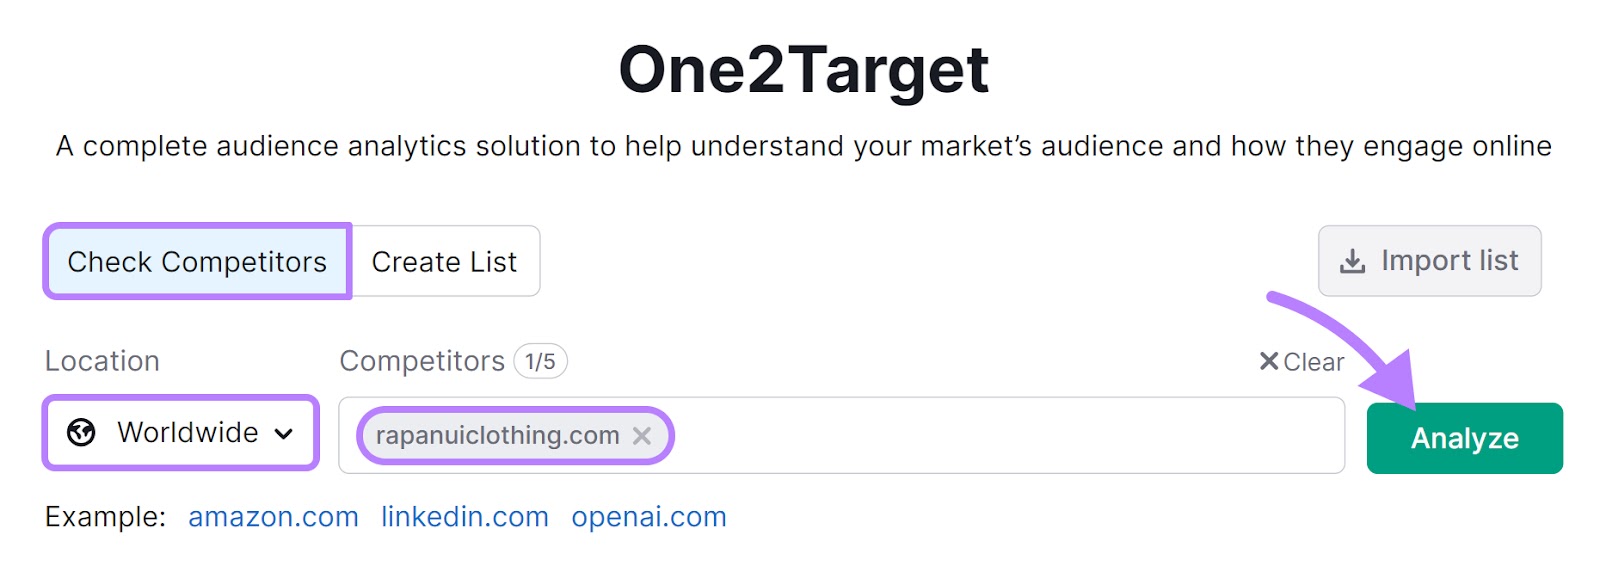 "rapanuiclothing.com" entered into One2Target tool search bar